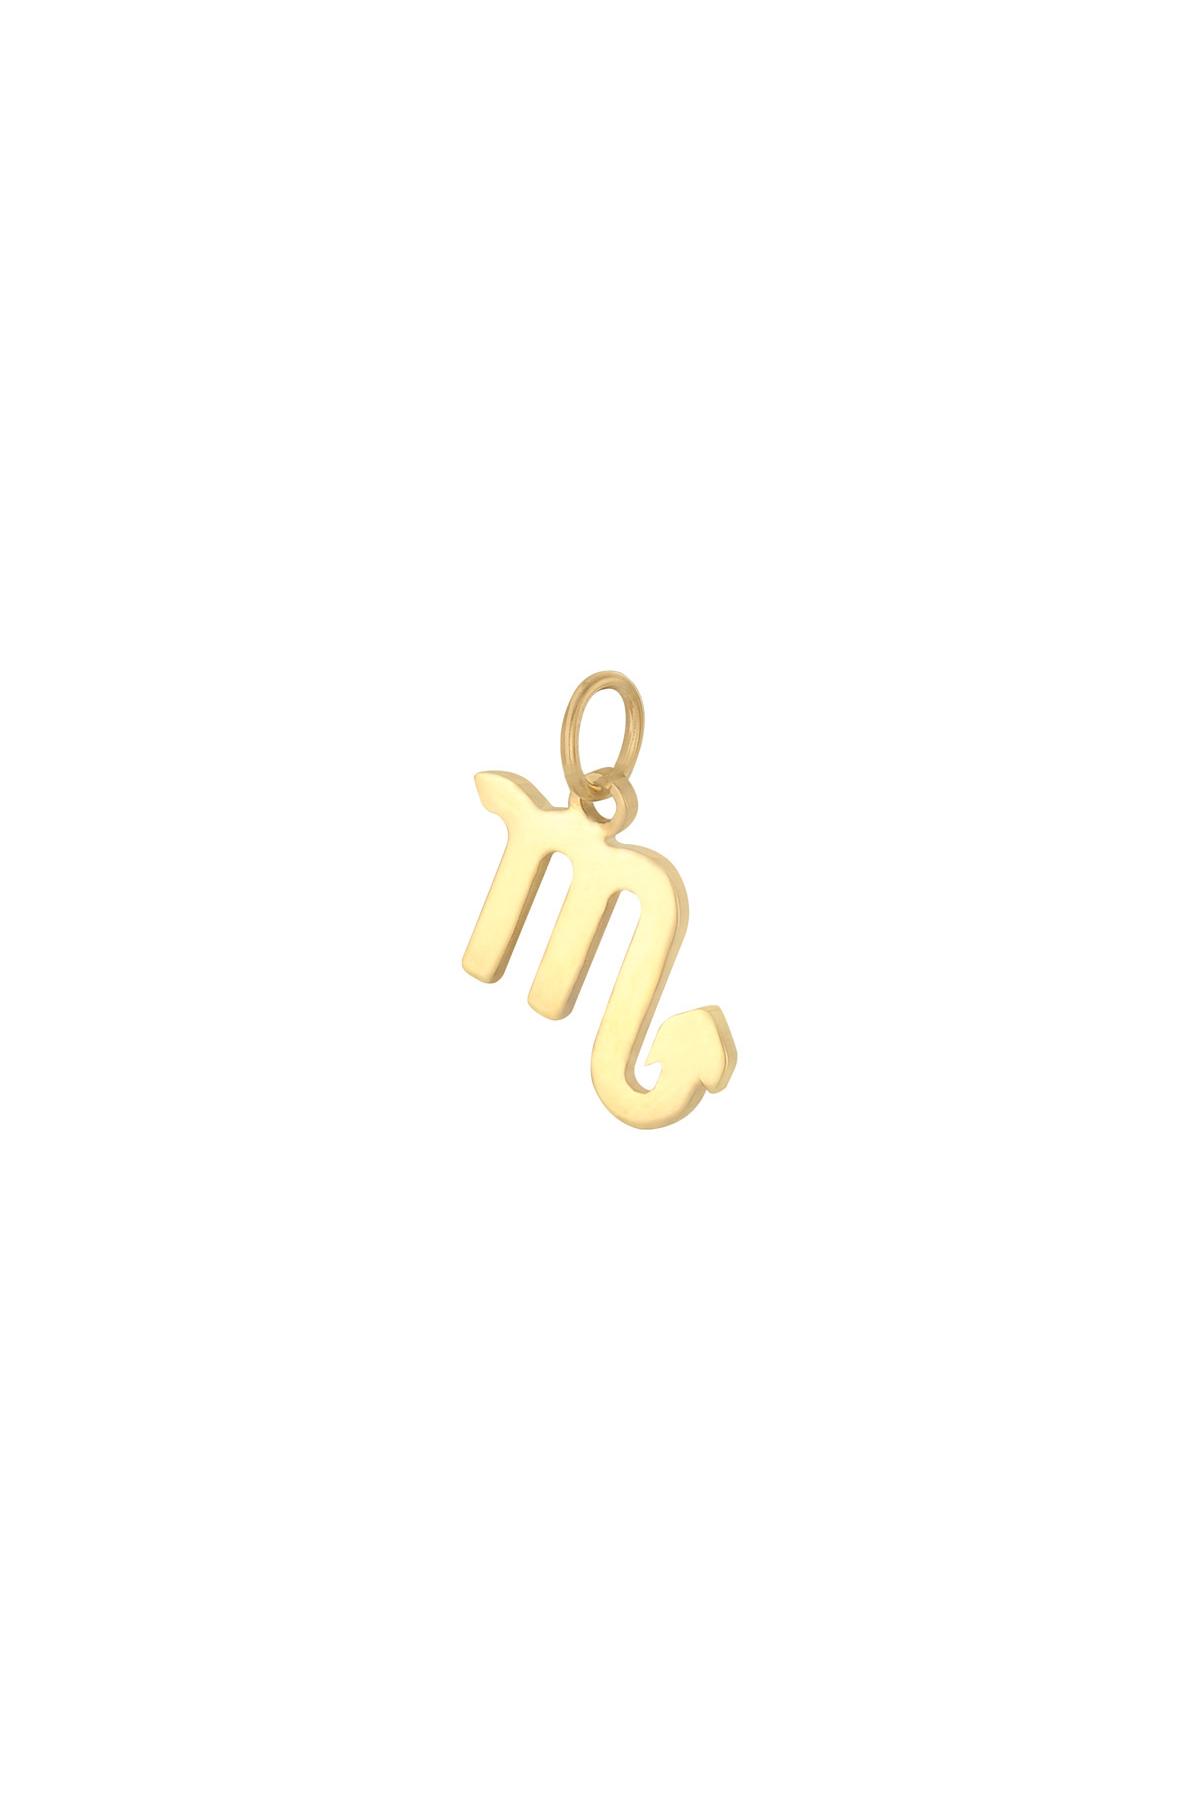 Gold / Charm Zodiac Scorpio Gold Stainless Steel Picture13